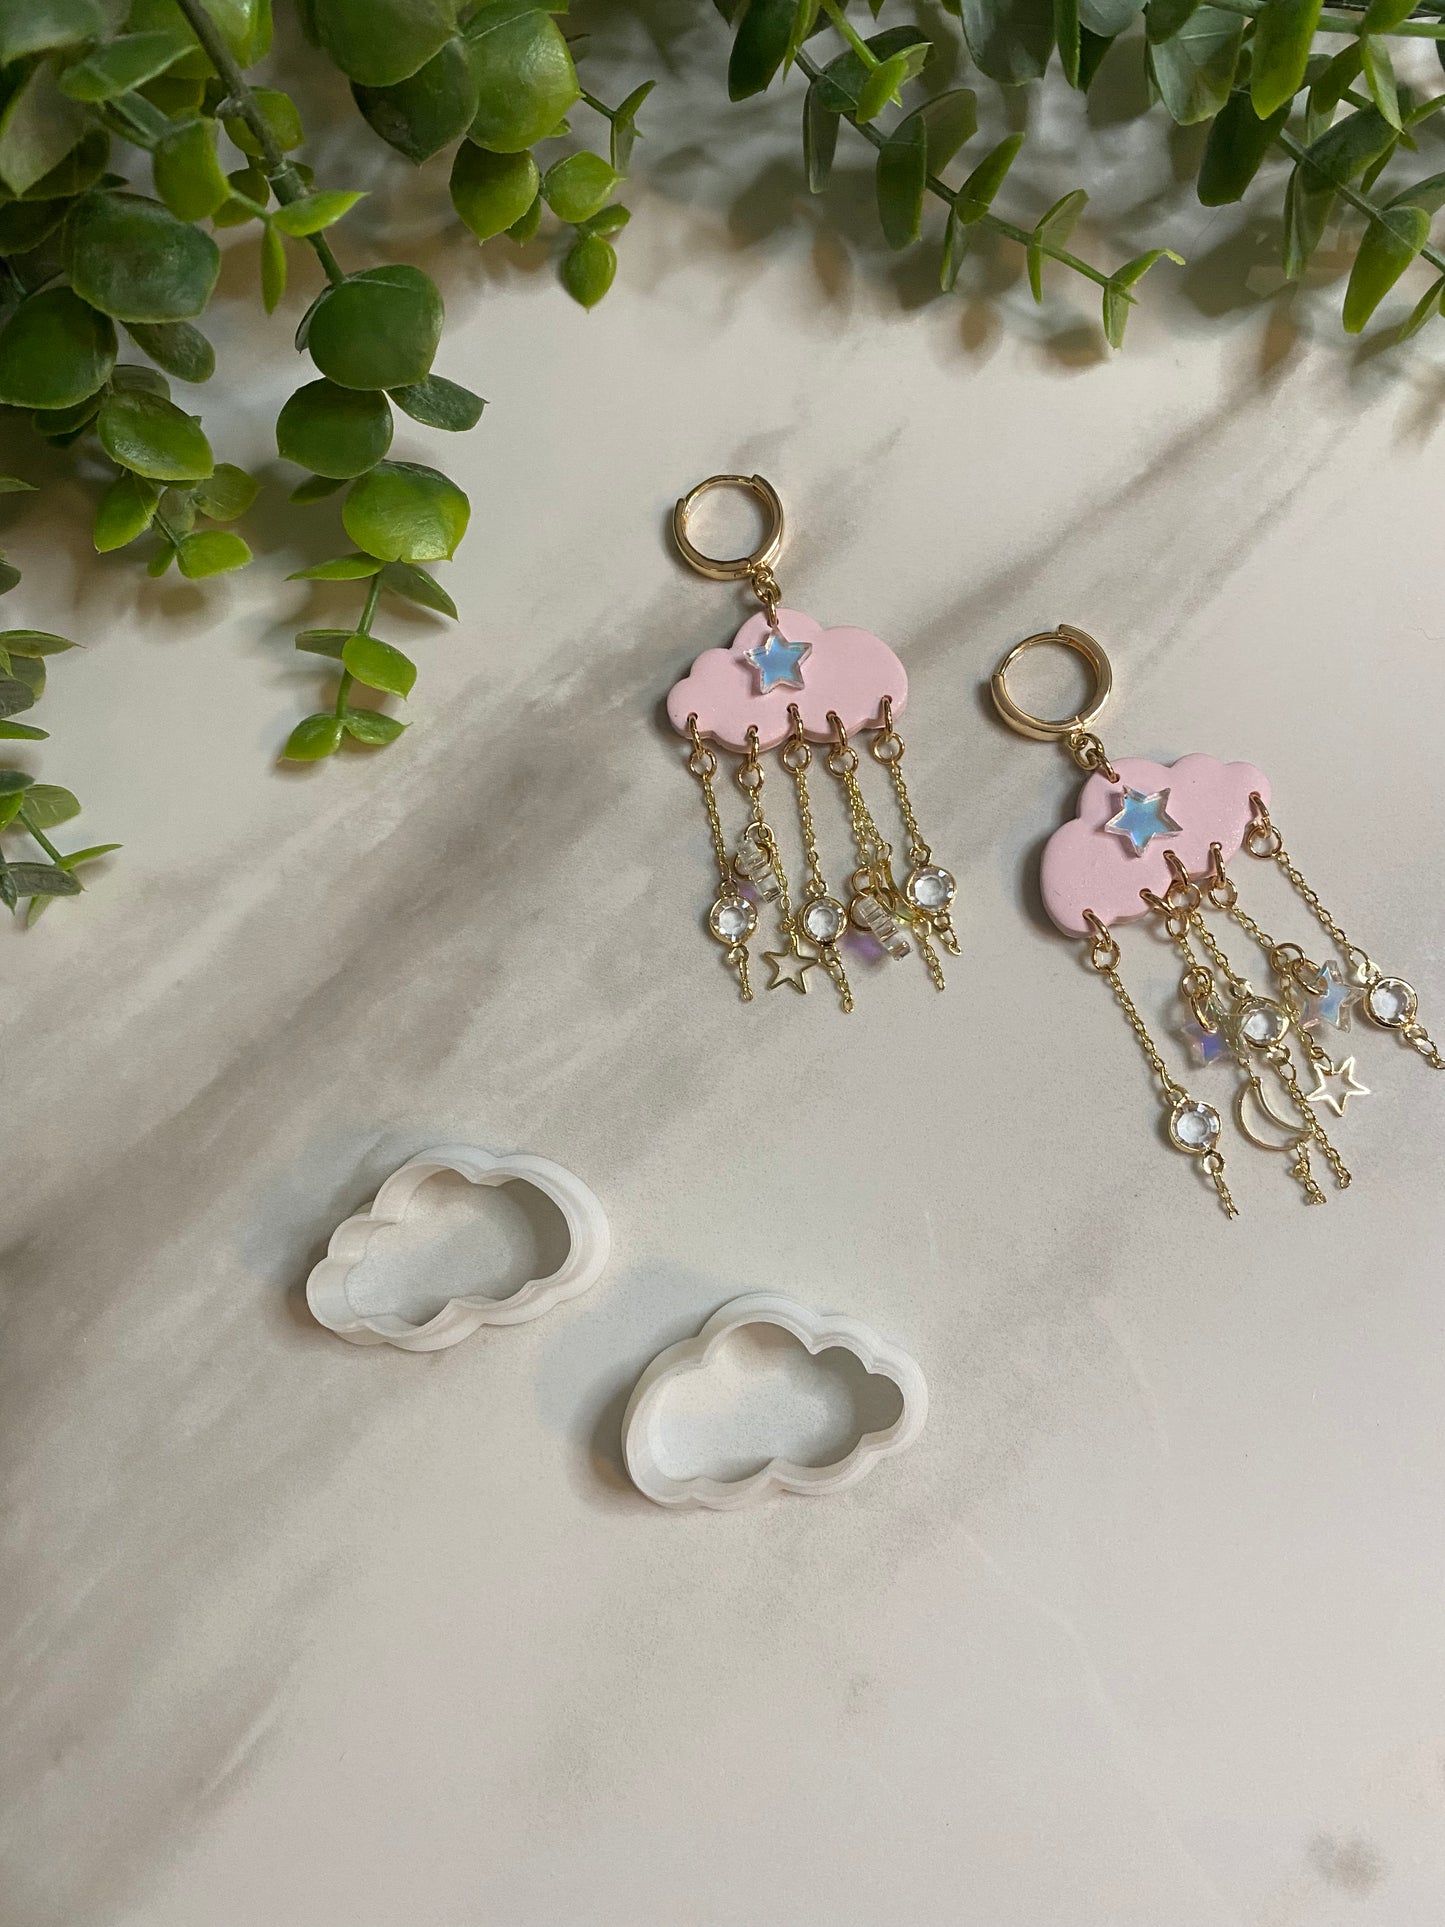 Cloud - Polymer Clay Cutters